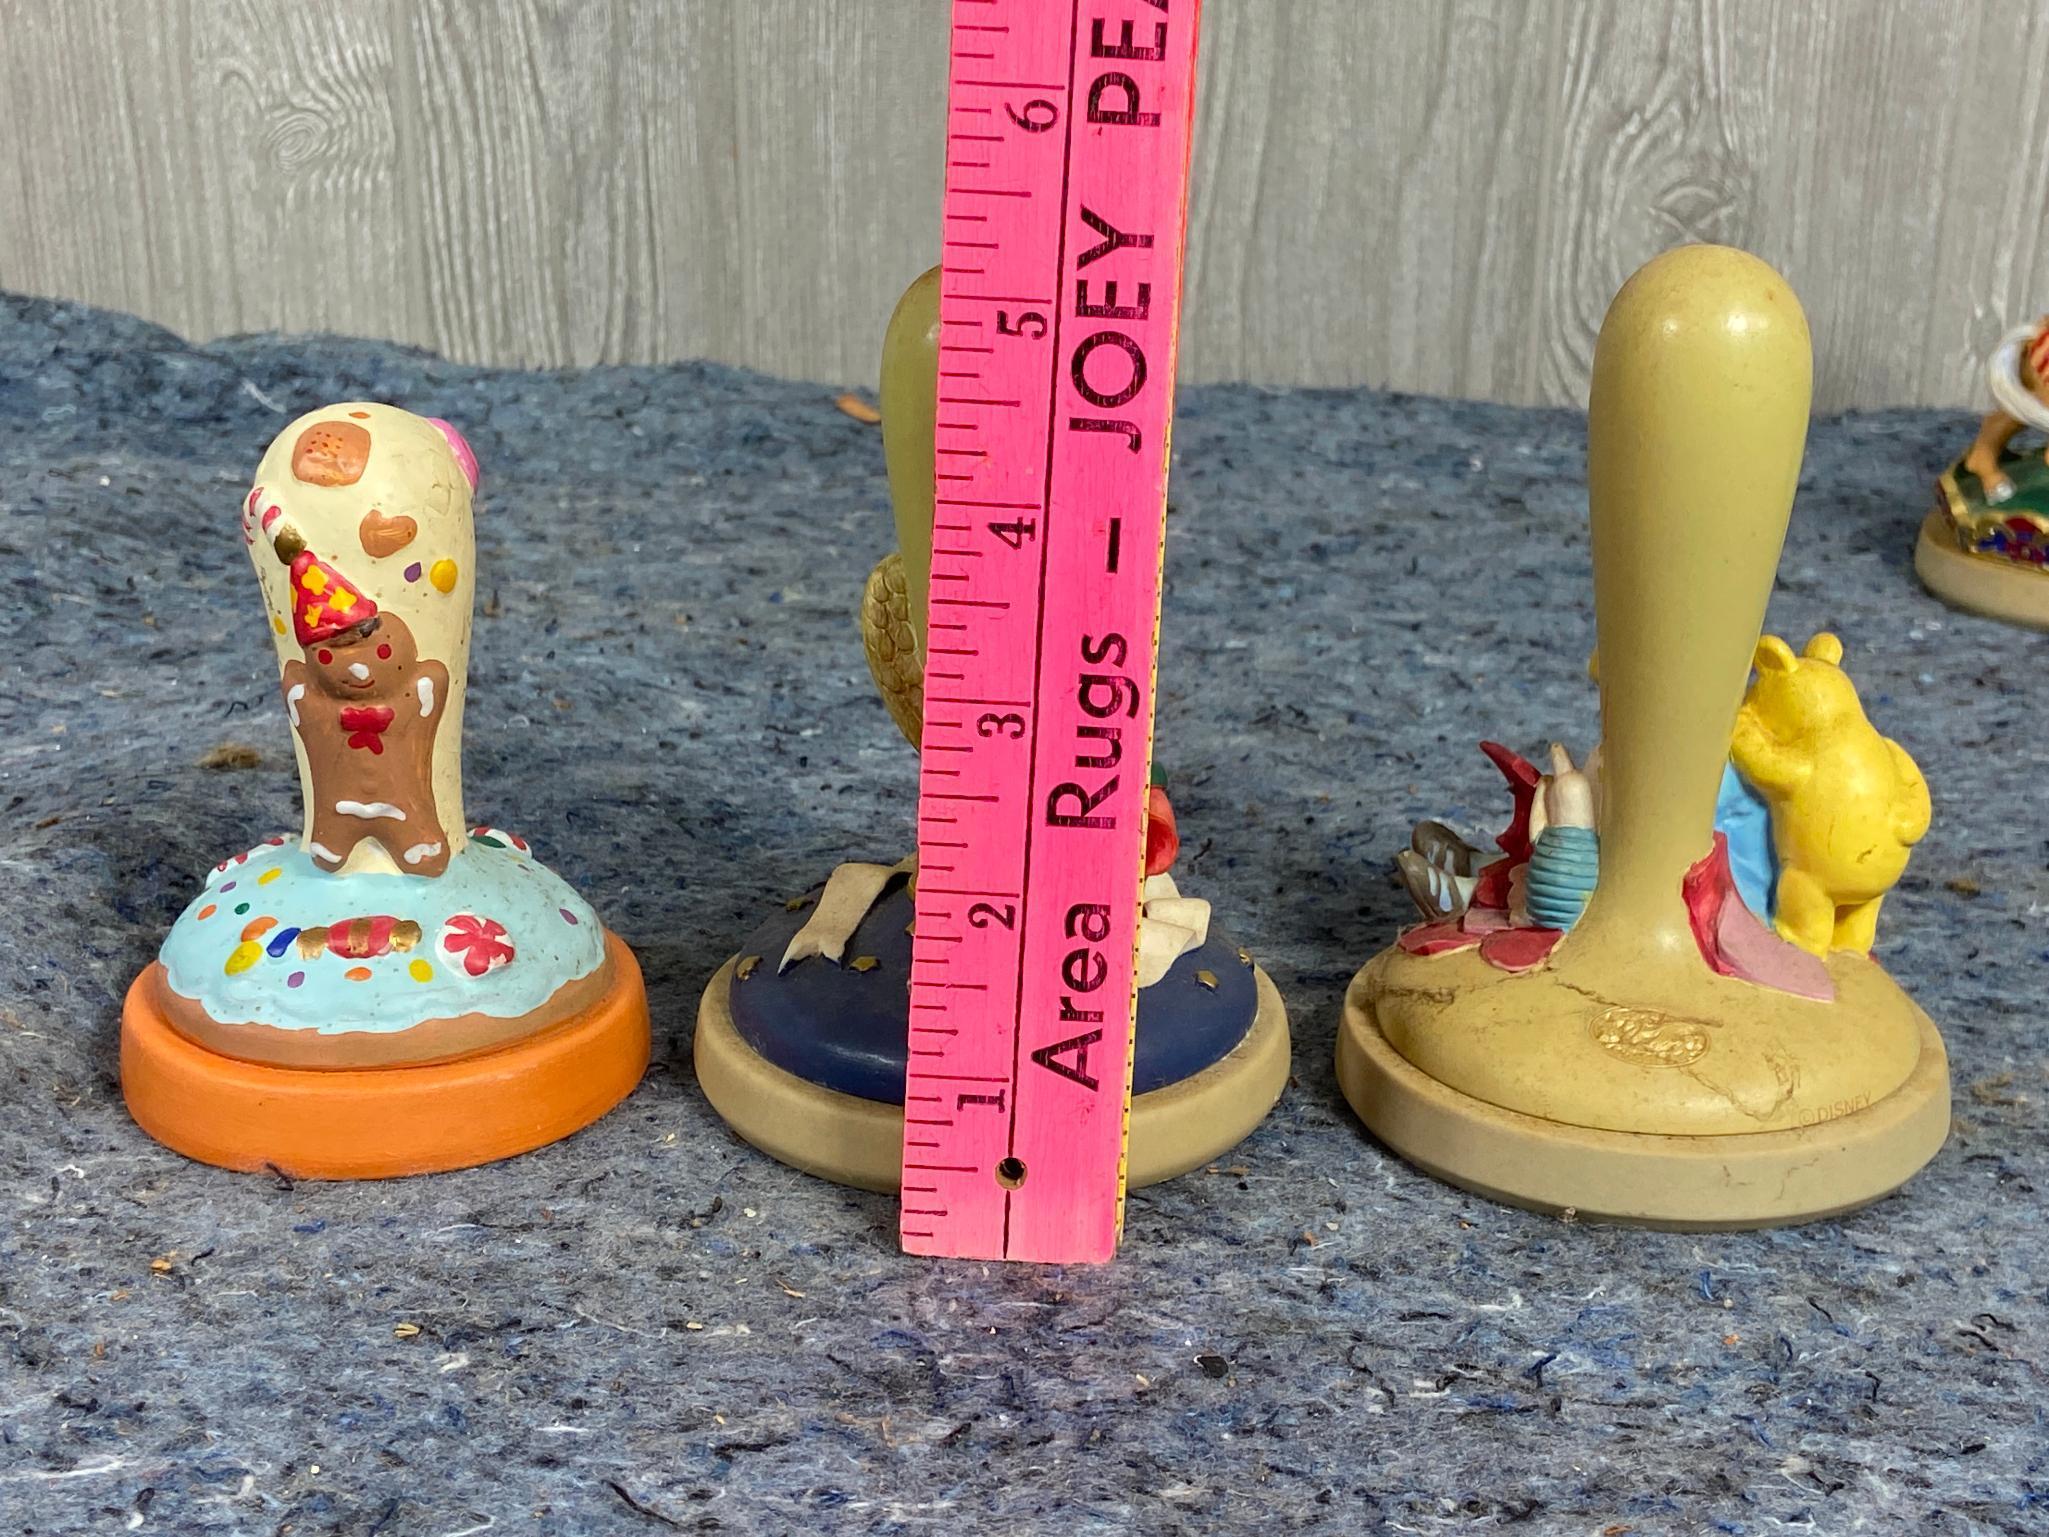 10 Vintage Cookie Molds including Horses, Tigers, Birthday Cake, Santa, Beach, and More